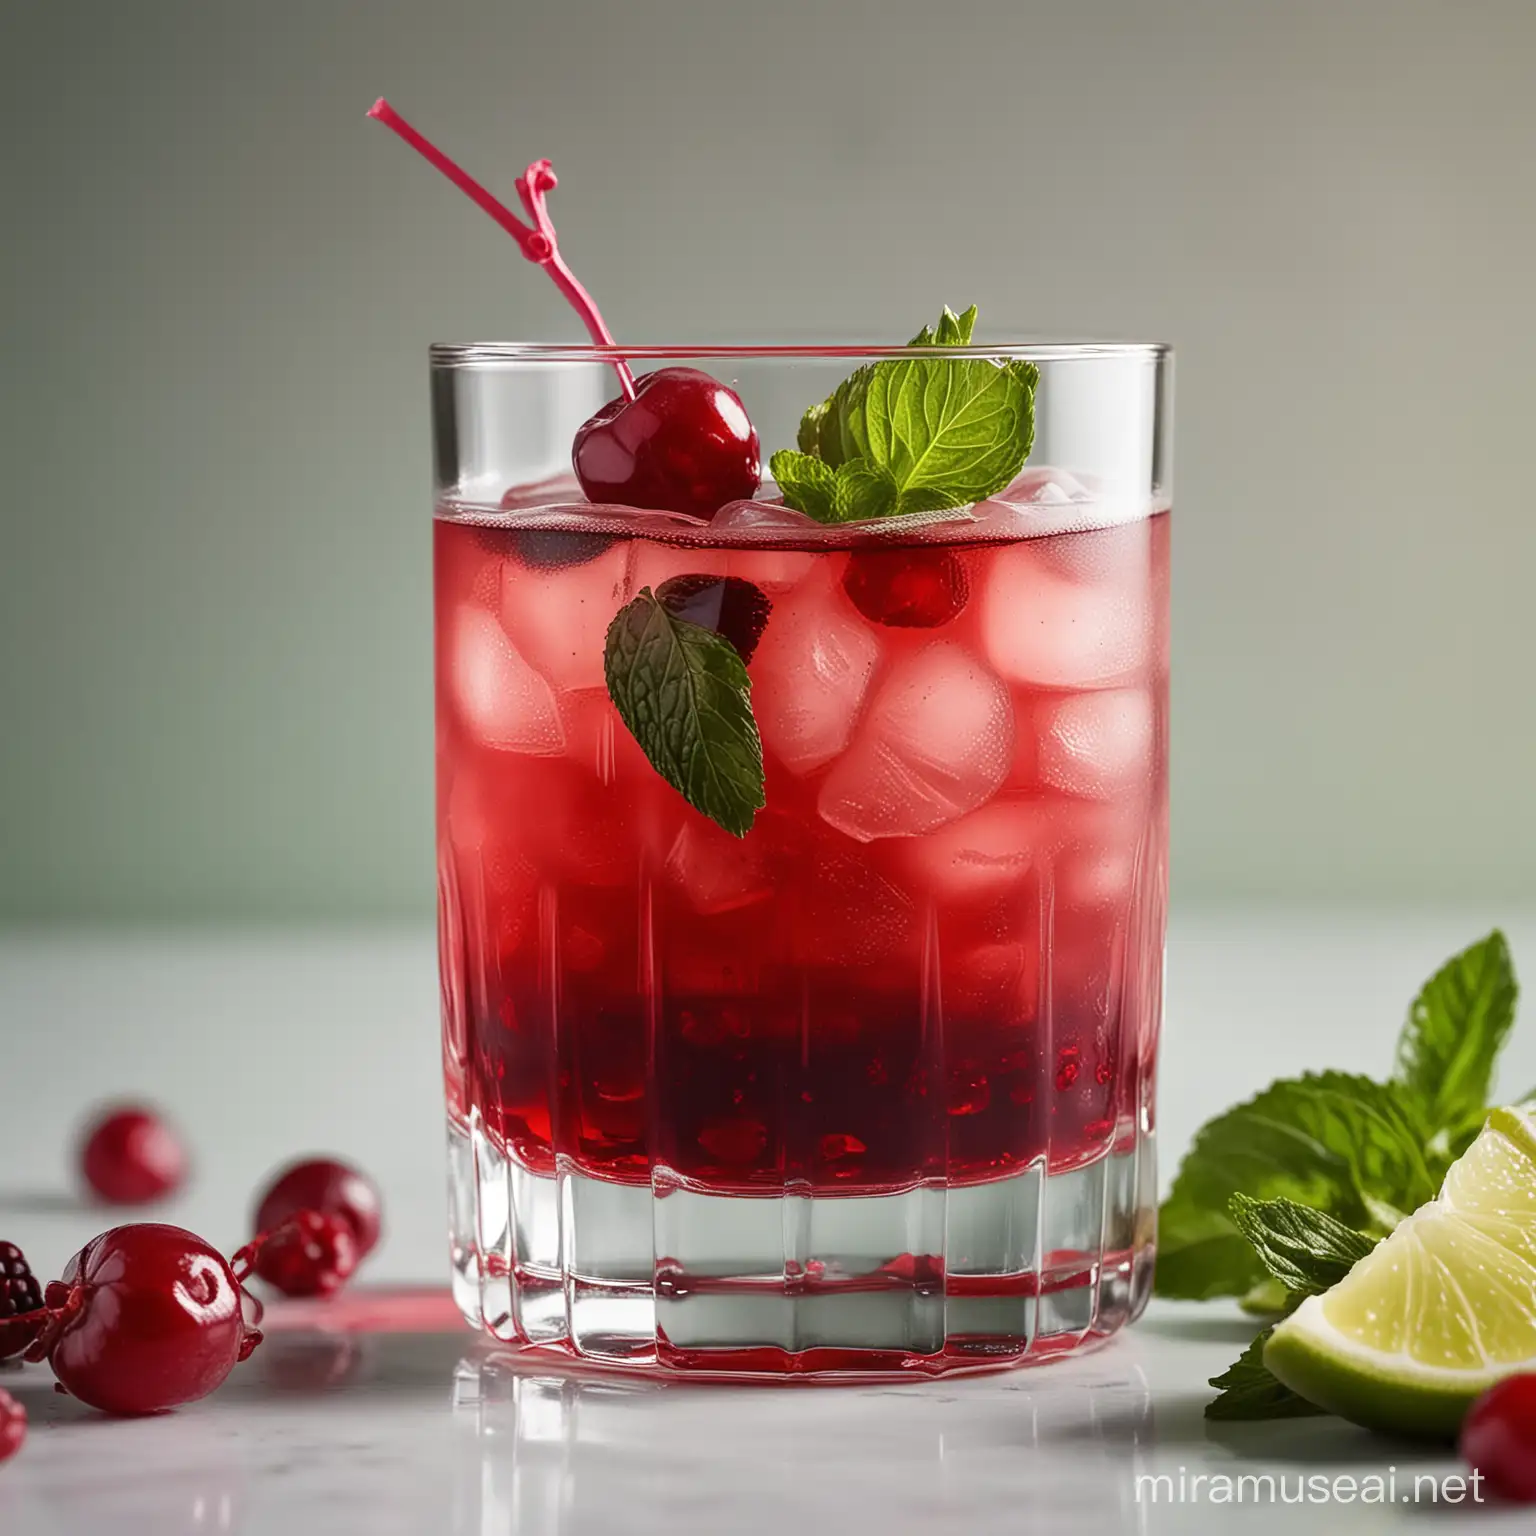 Vibrant Crimson Berry Delight Cocktail with Fresh Mint and Lime Garnish